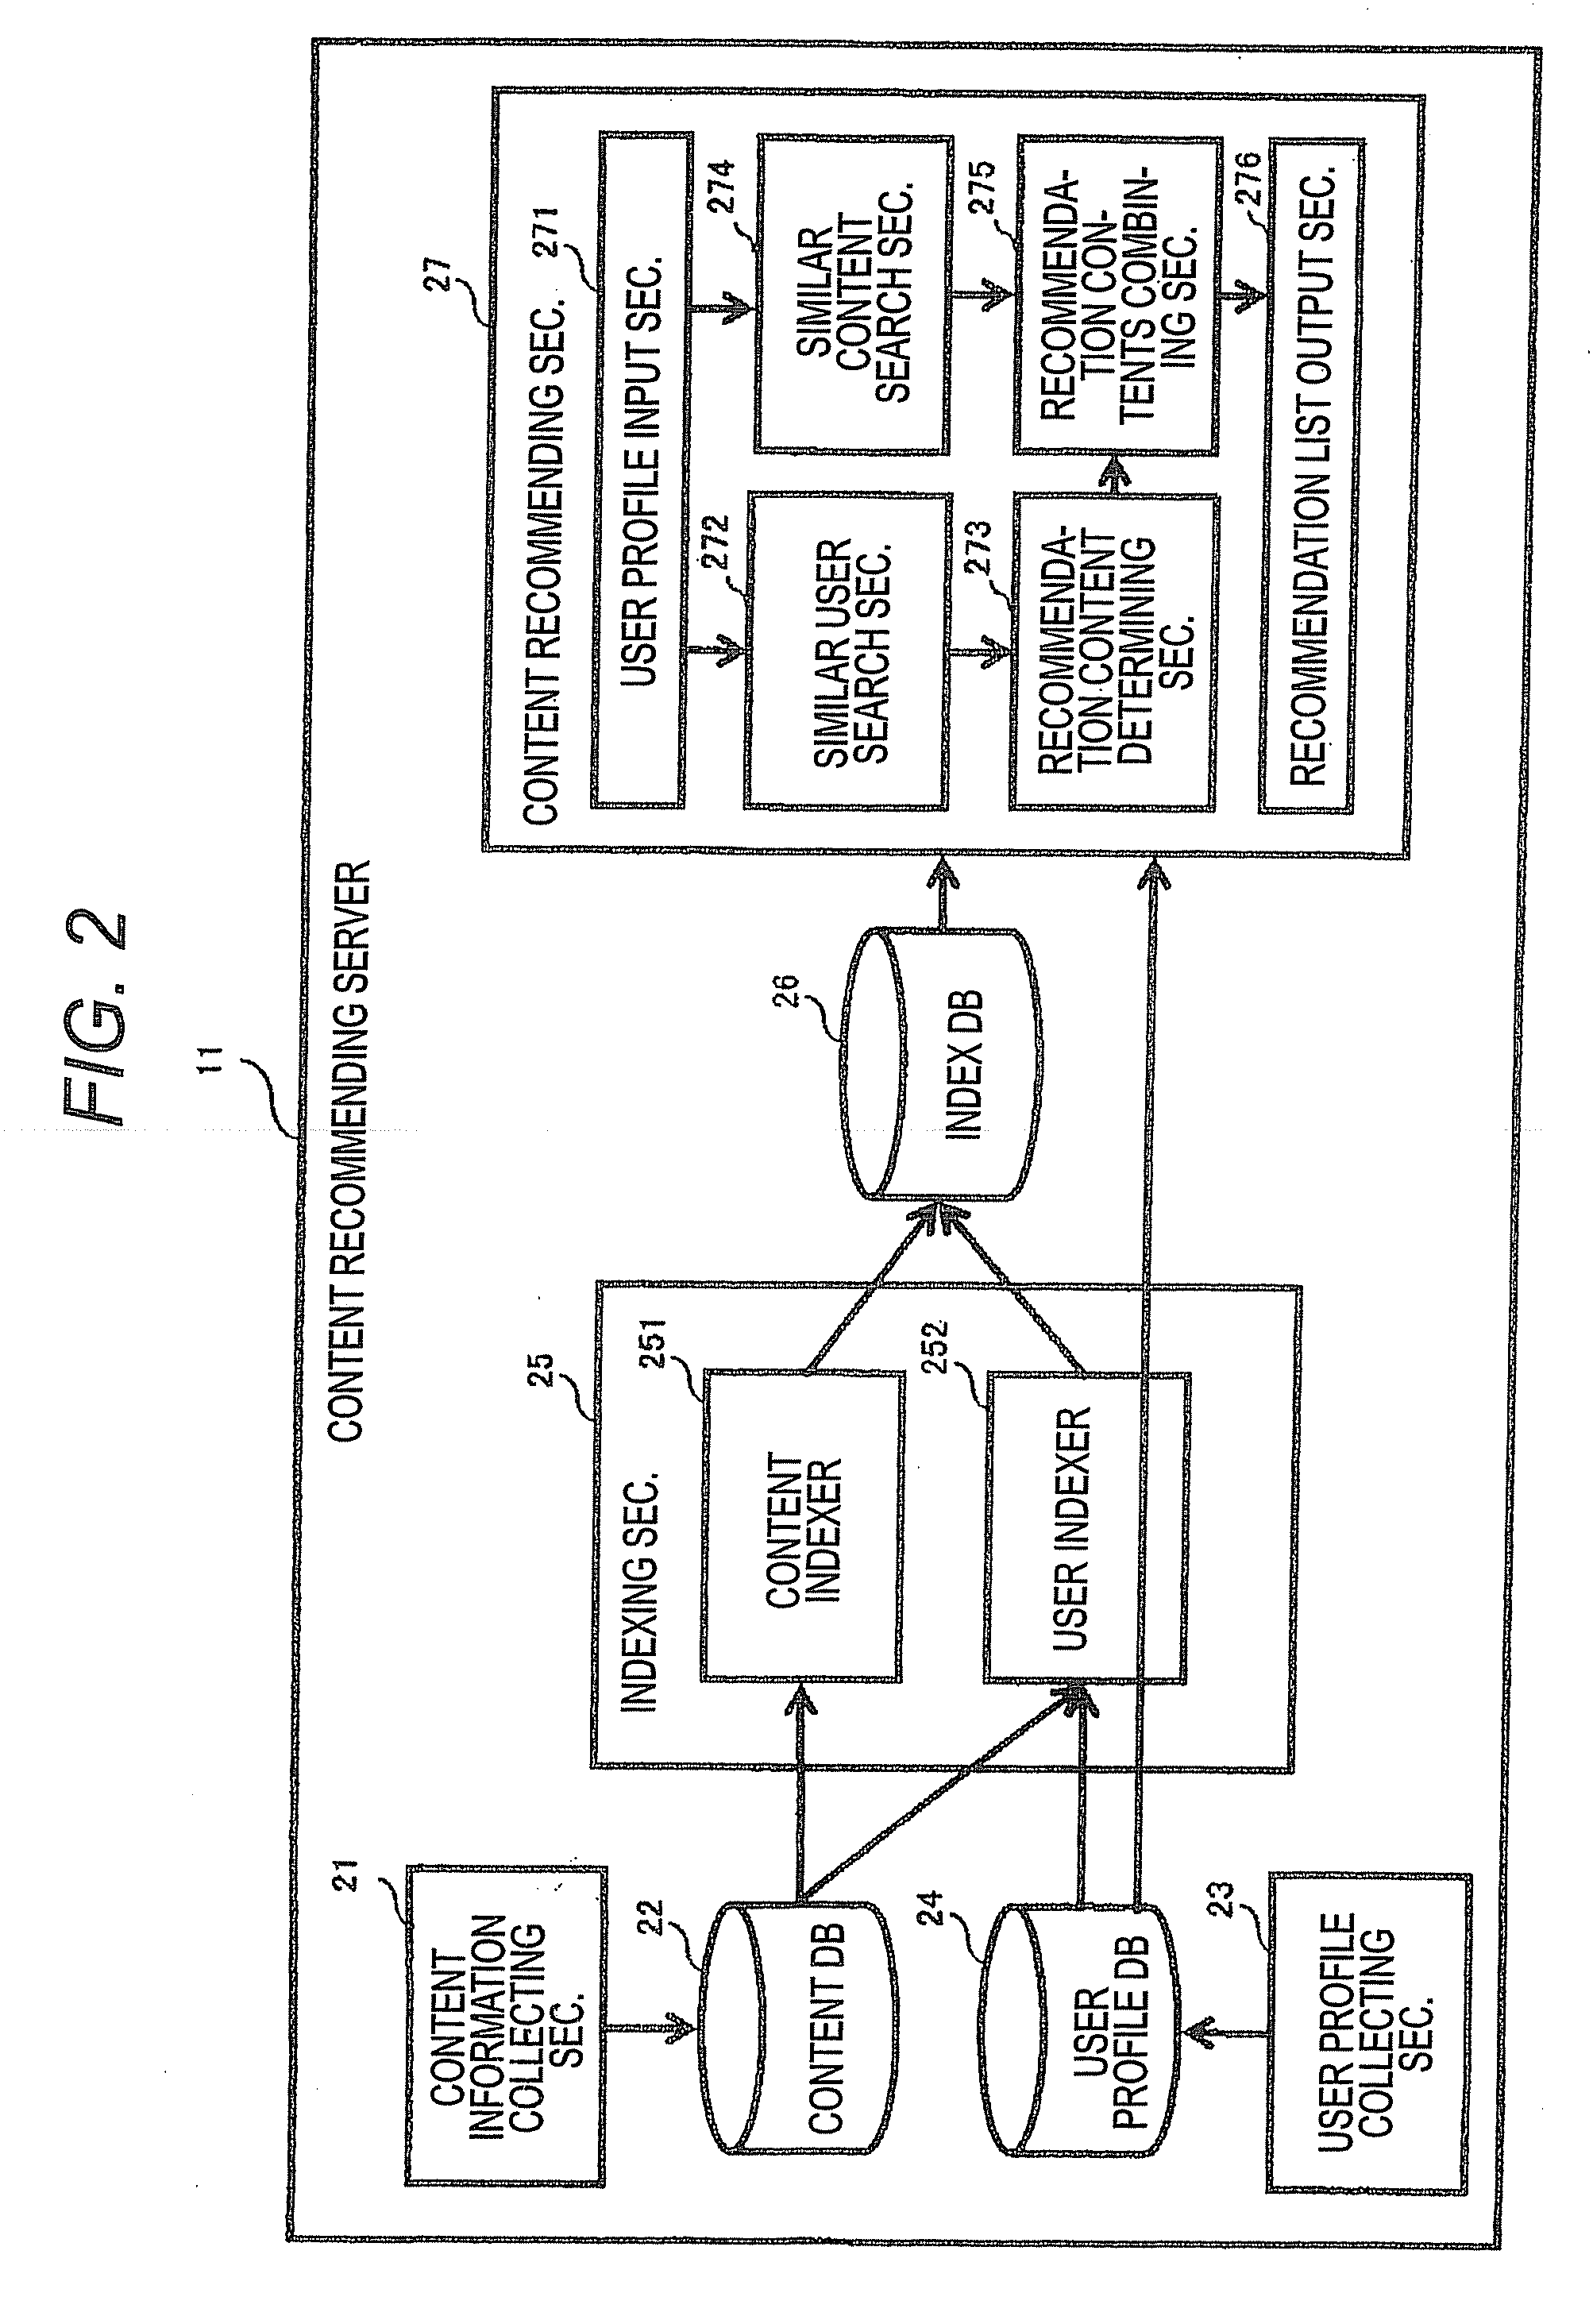 Hybrid content recommending server, system, and method